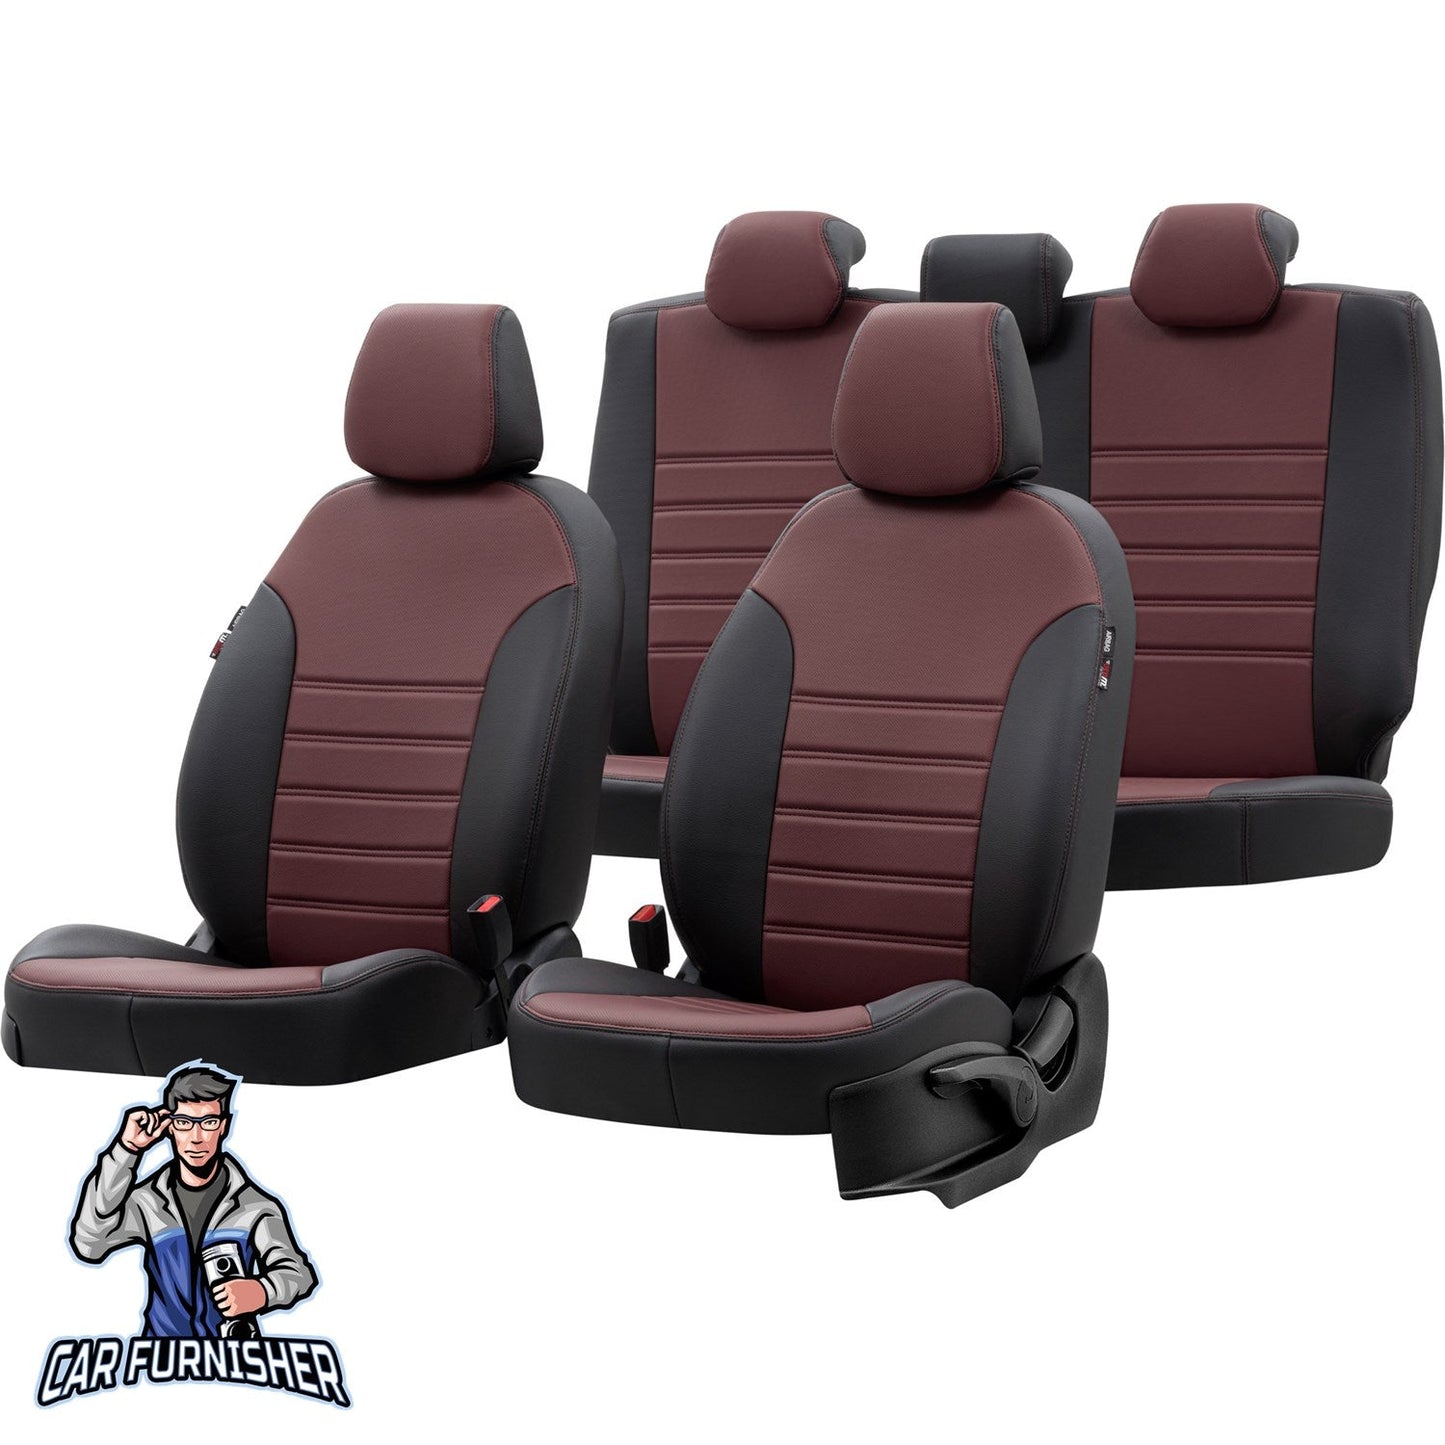 Mercedes GLC Class Seat Covers Istanbul Leather Design Burgundy Leather